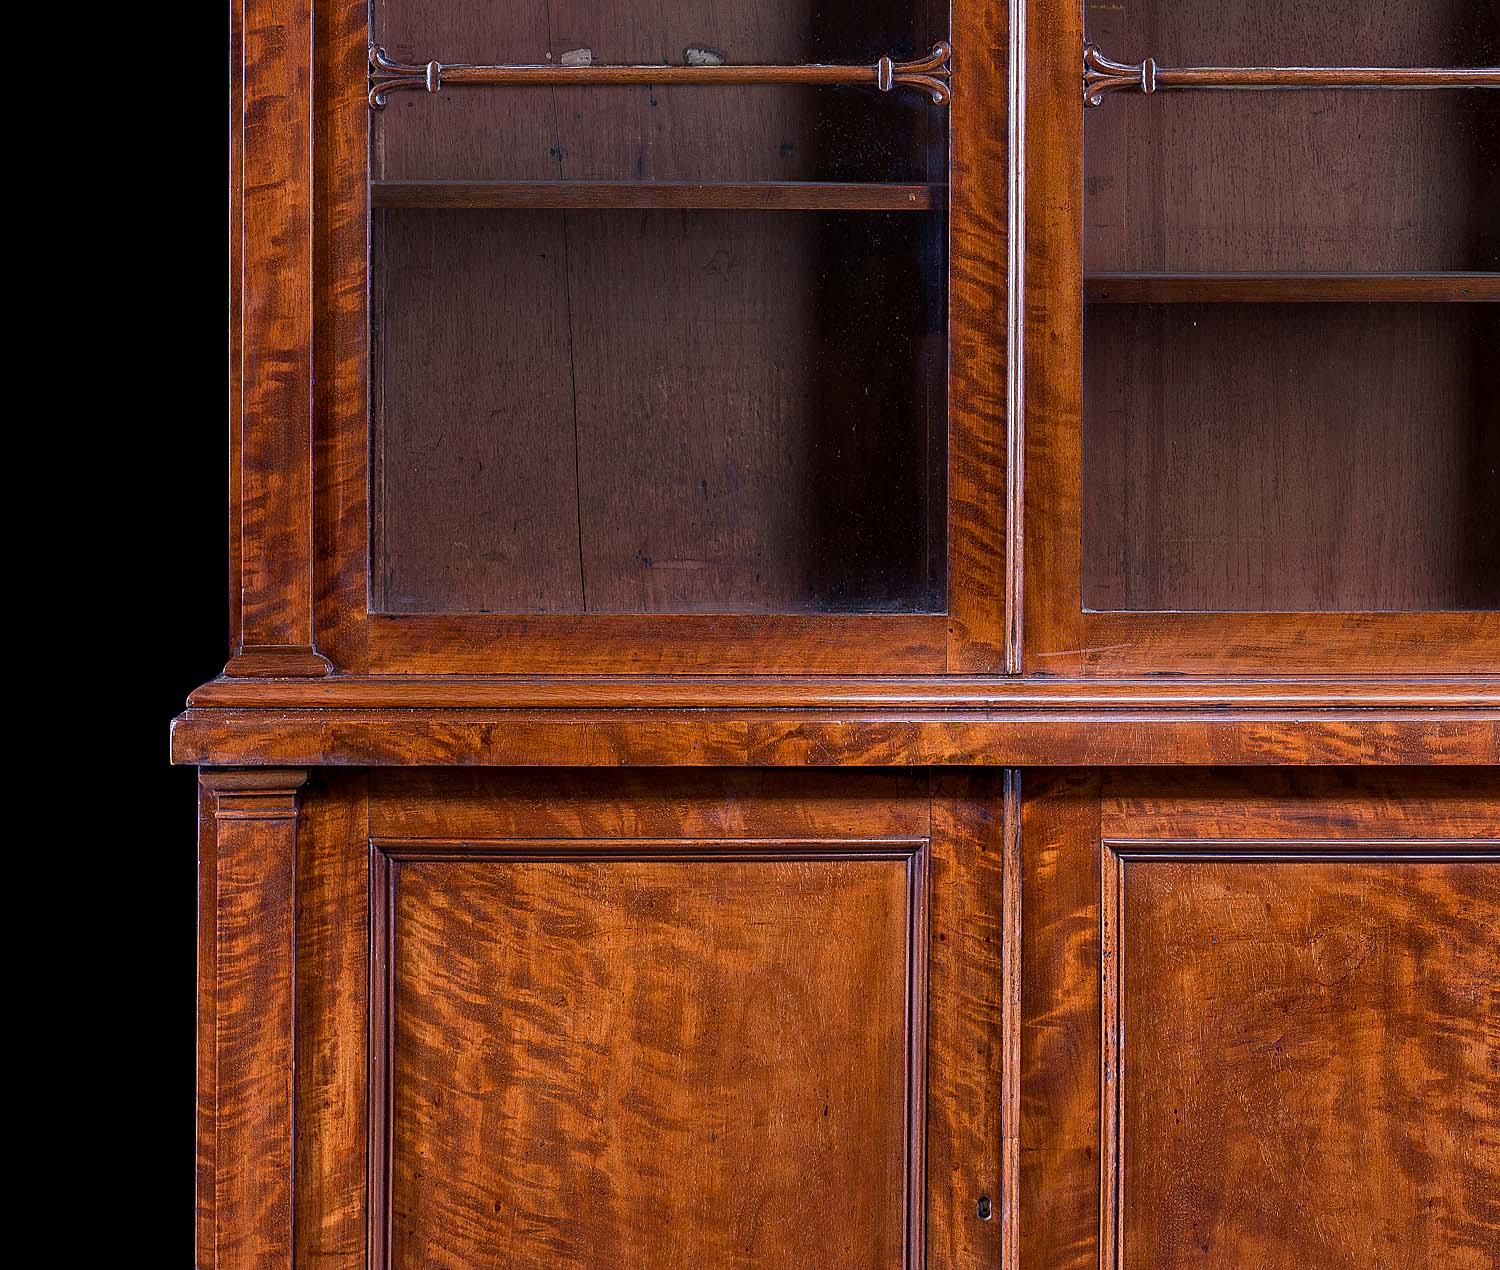 A fine William IV mahogany library bookcase with a moulded cornice above three glazed doors. The left and right doors are hinged, the central door slides. The cabinet base also features a central sliding door flanked by a pair of hinged doors and is